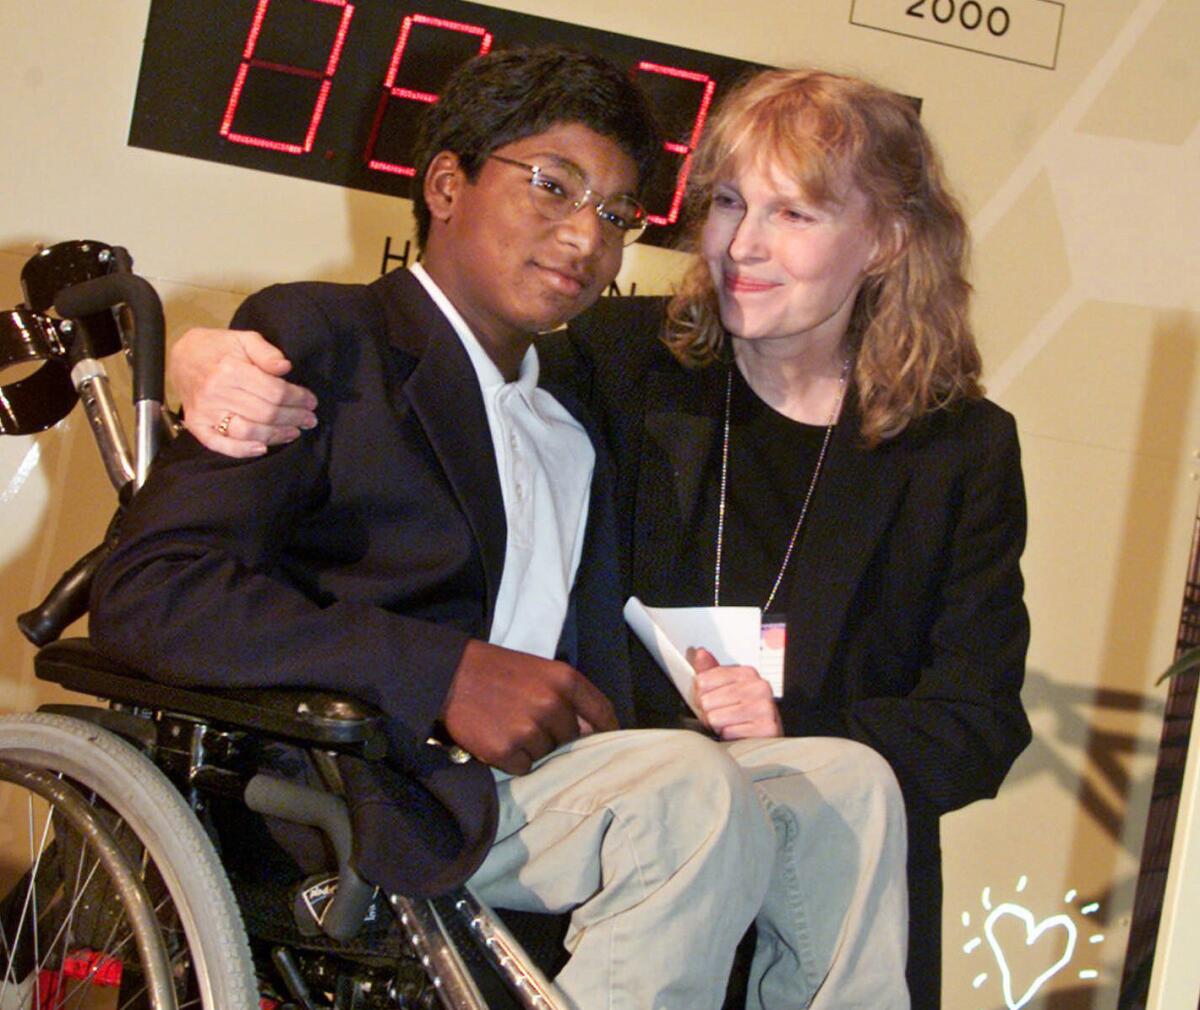 Actress Mia Farrow poses with her son Thaddeus at a global summit on polio eradication at United Nations headquarters on Sept. 27, 2000.